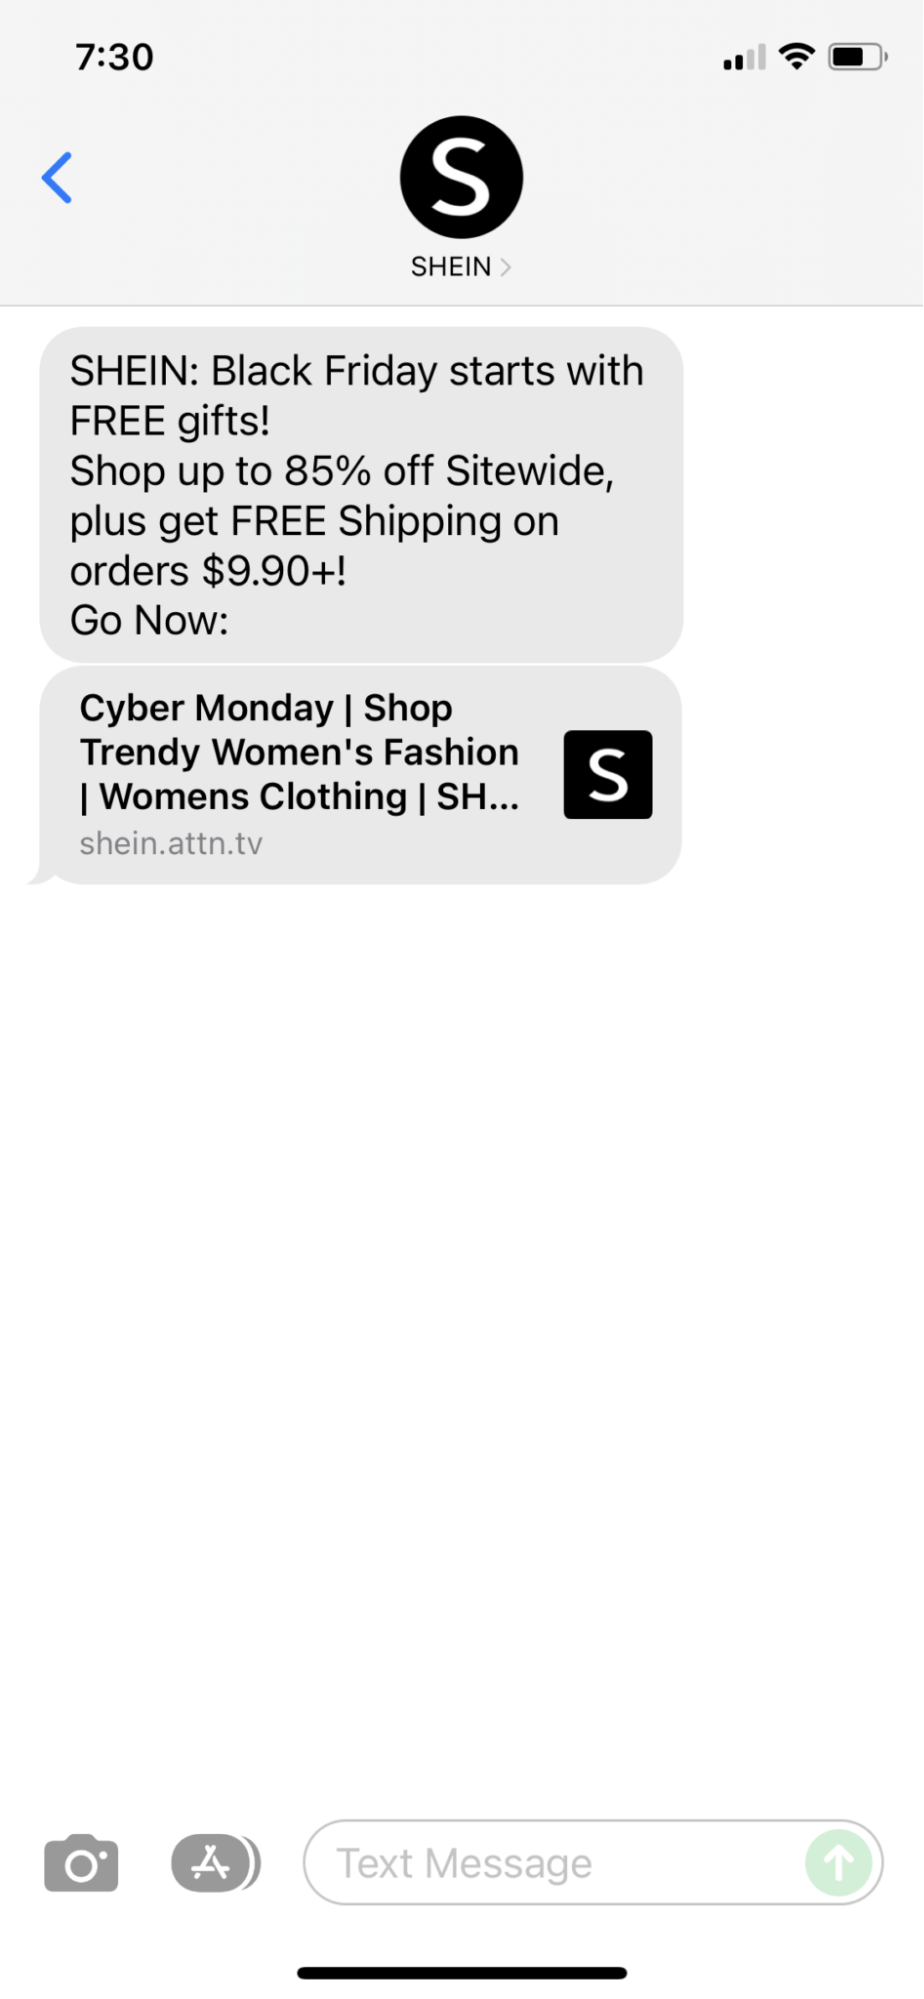 Black Friday SMS example from SHEIN